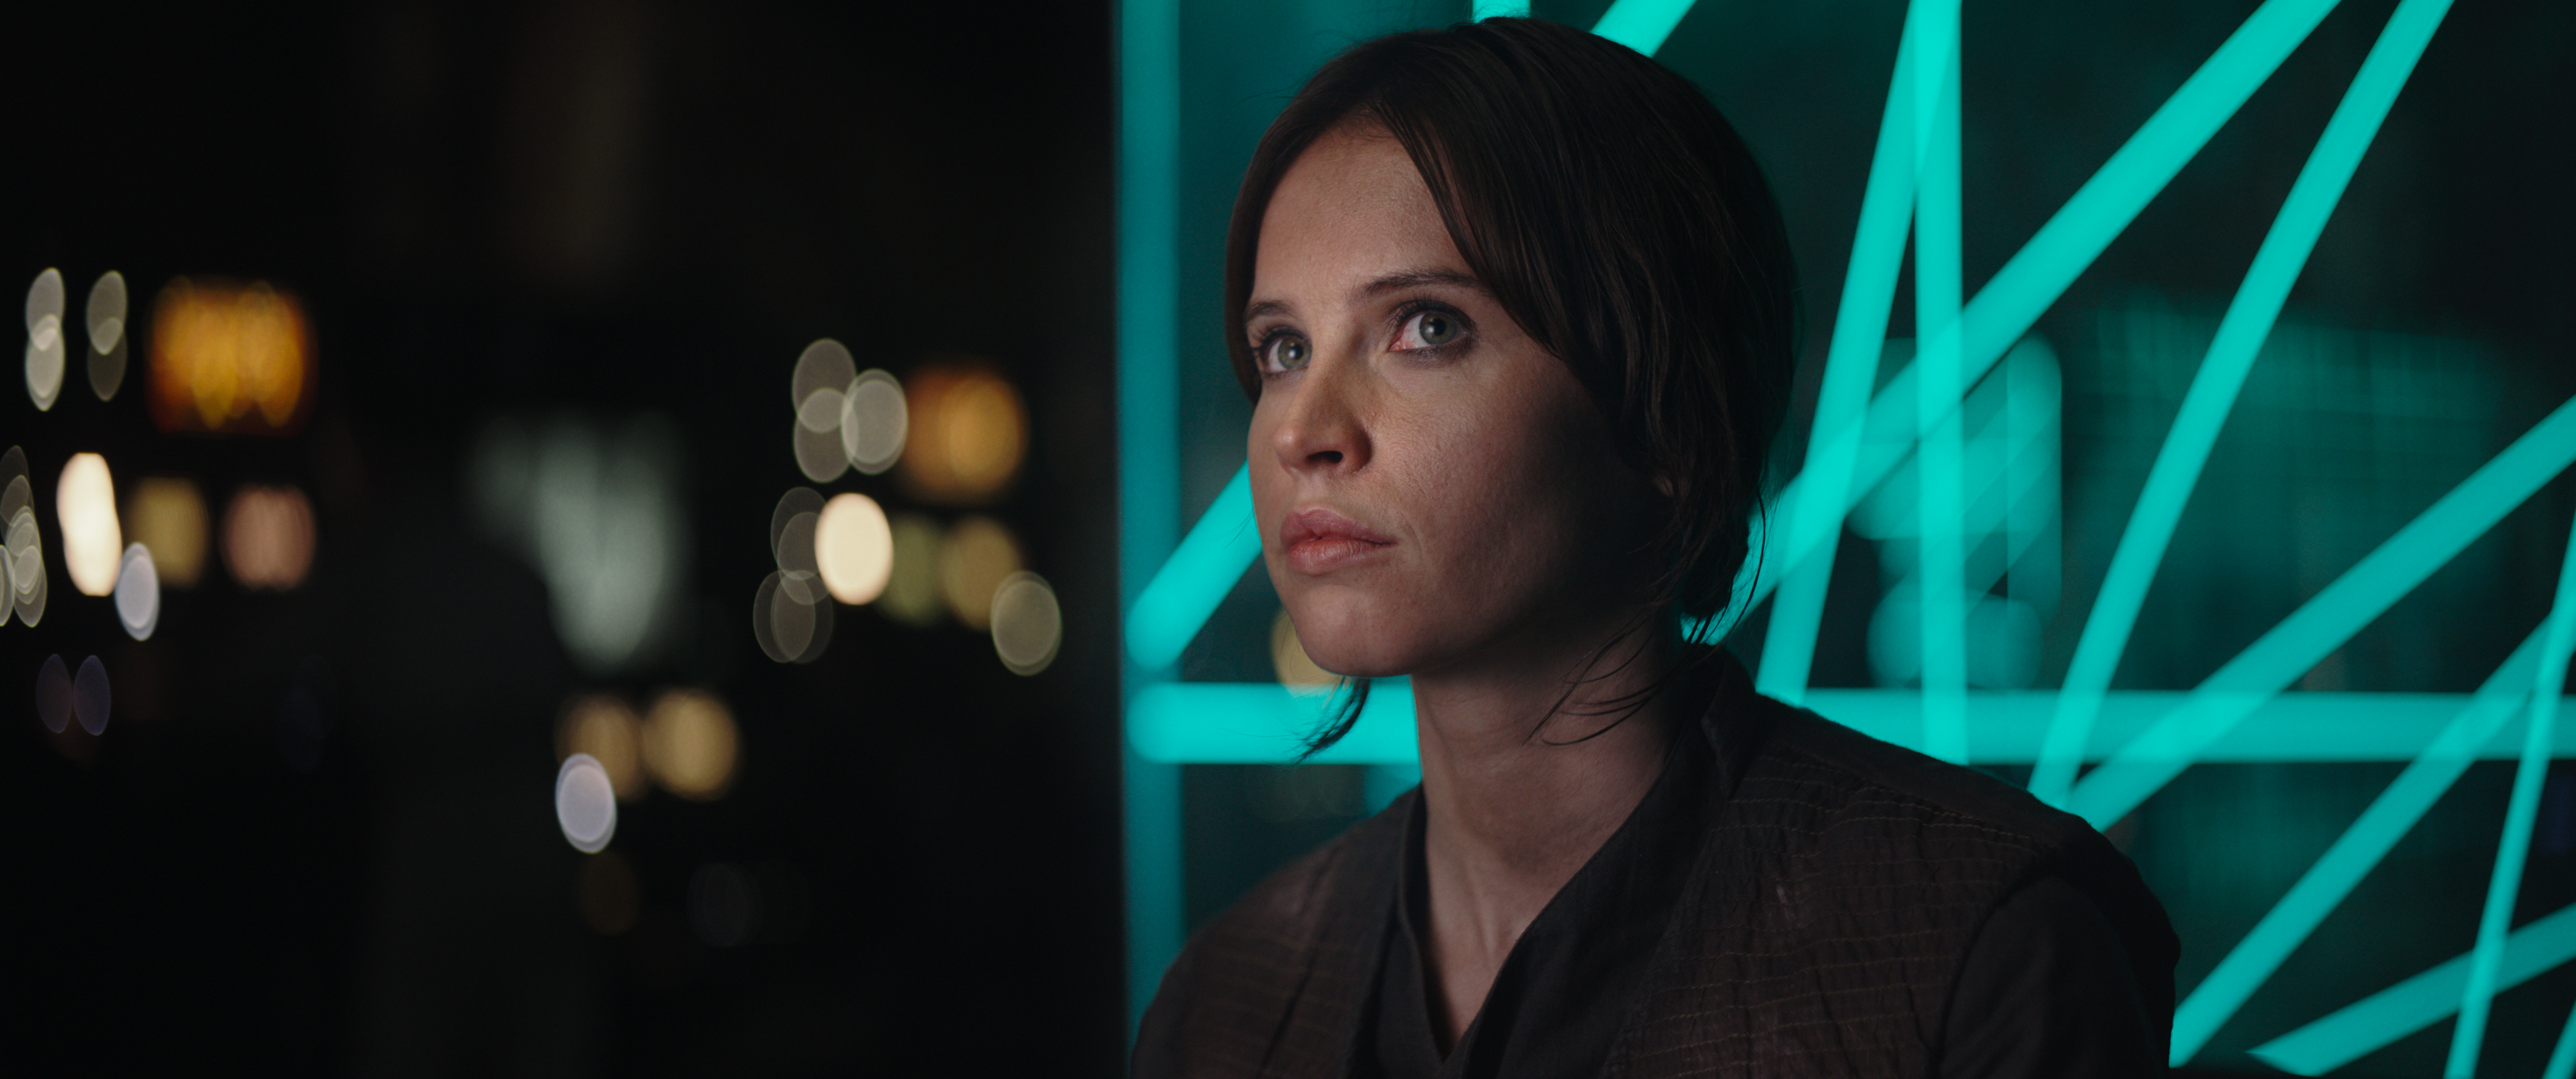 Rogue One Trailer Hit Today! Is it December Yet?